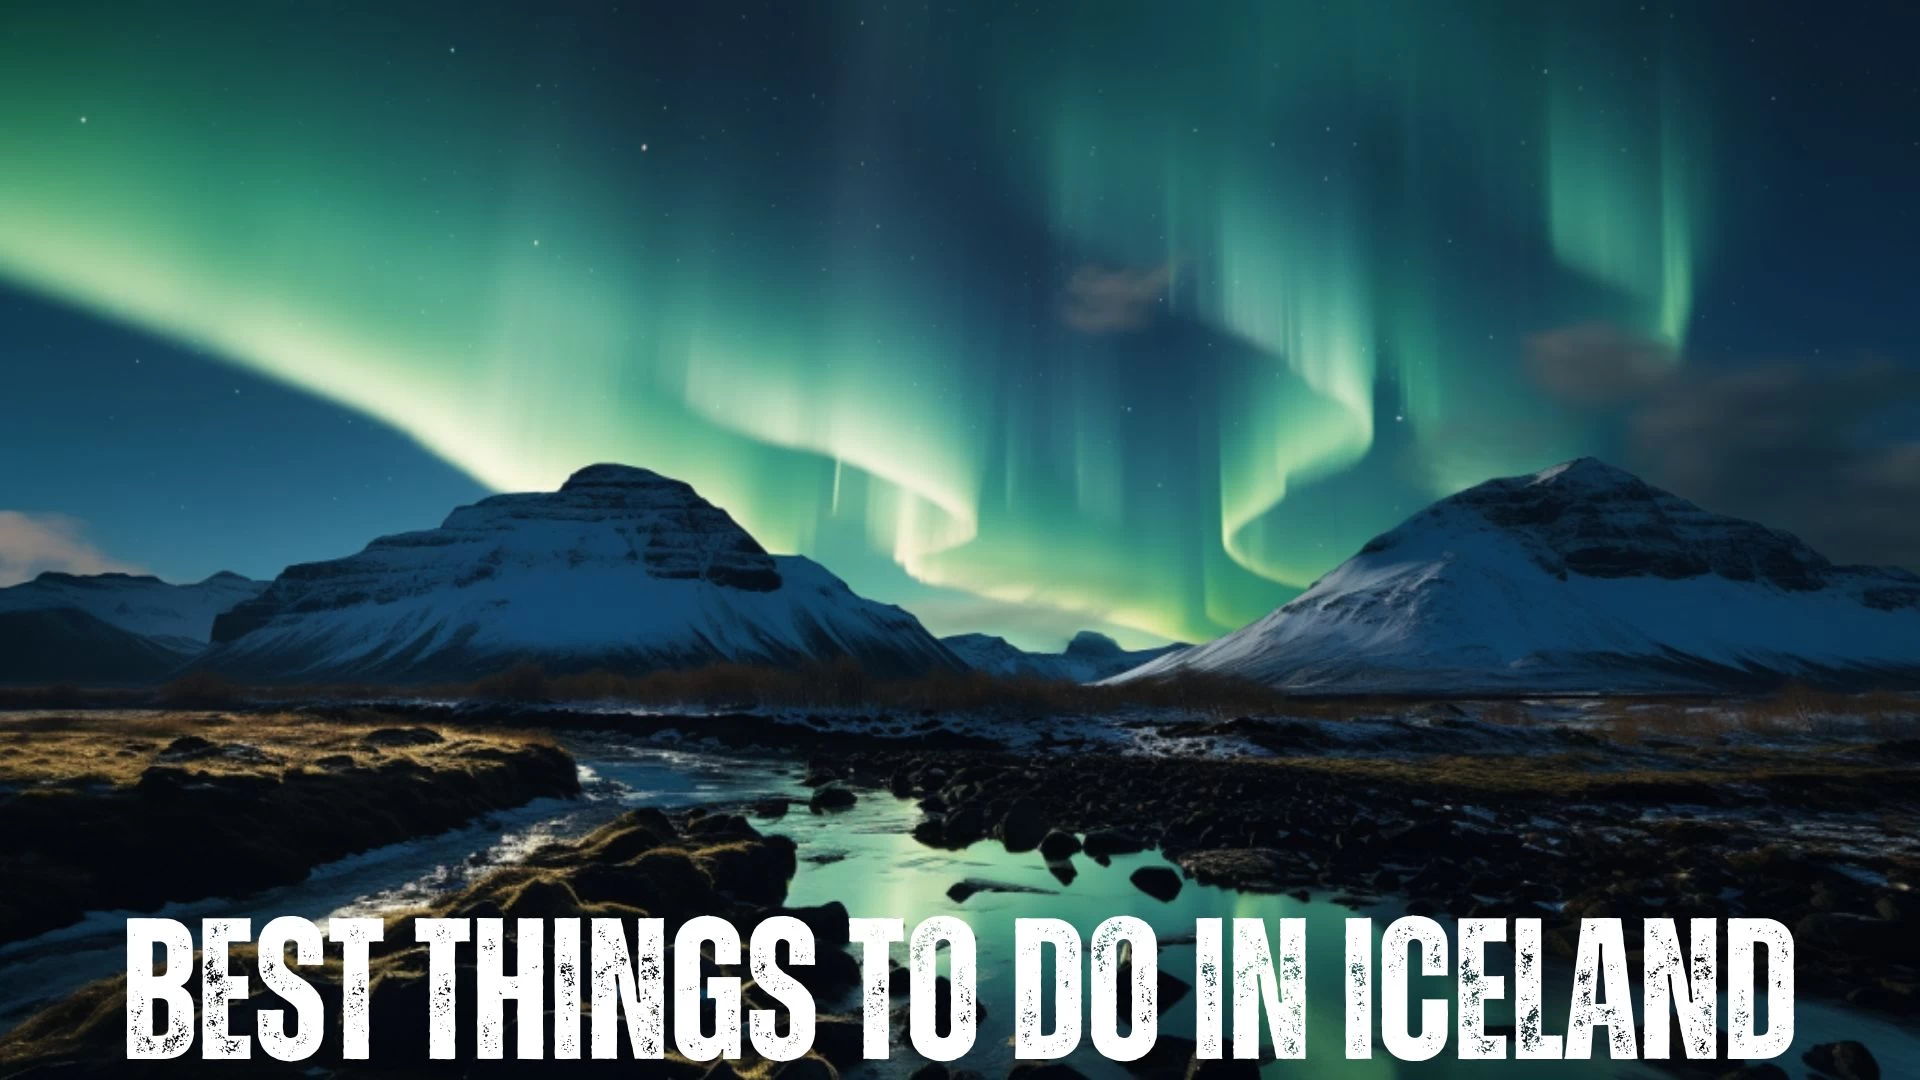 Best Things To Do in Iceland - Top 10 Journey of Wonders